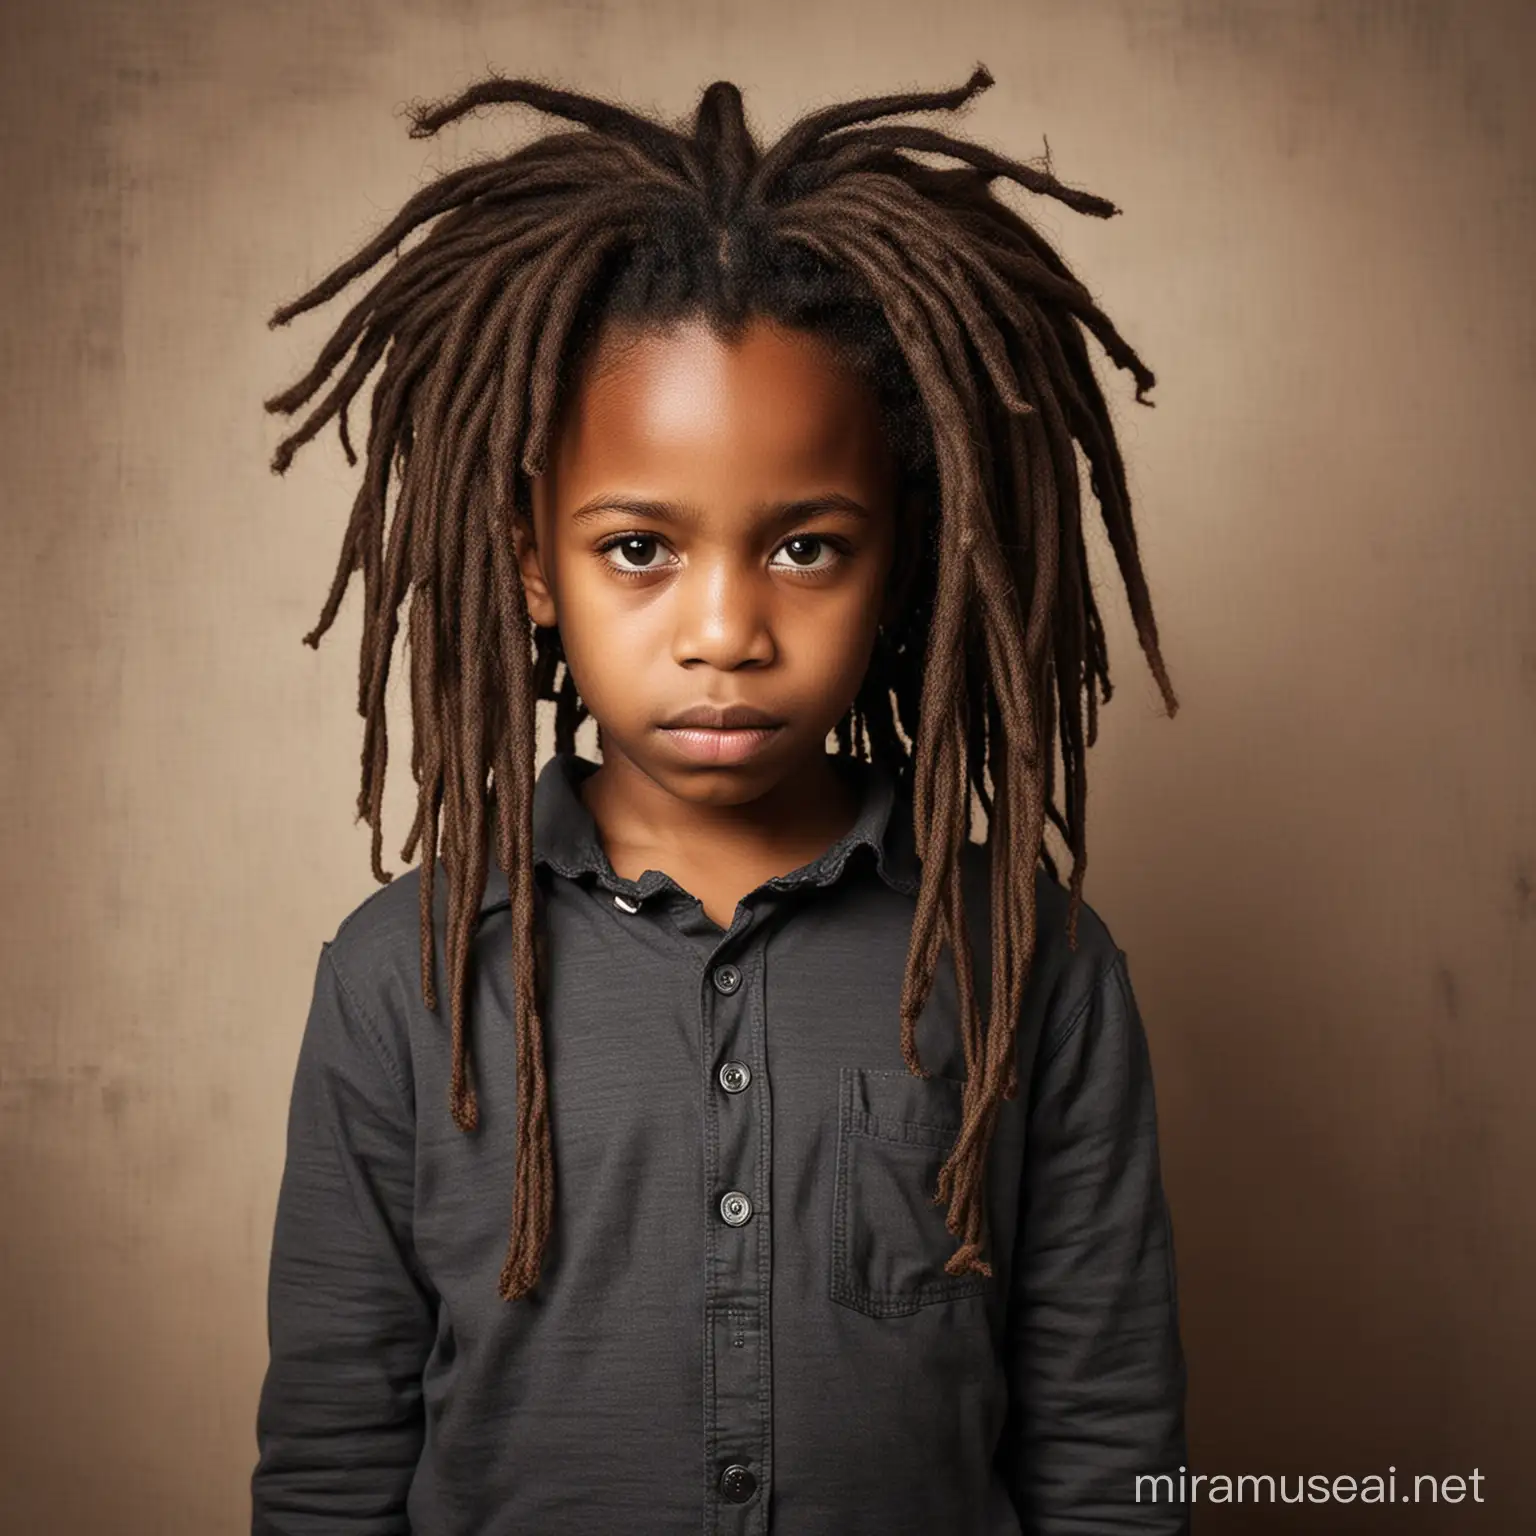 sad A black child between the age of 5 and 7 years old with dreadlocks full image